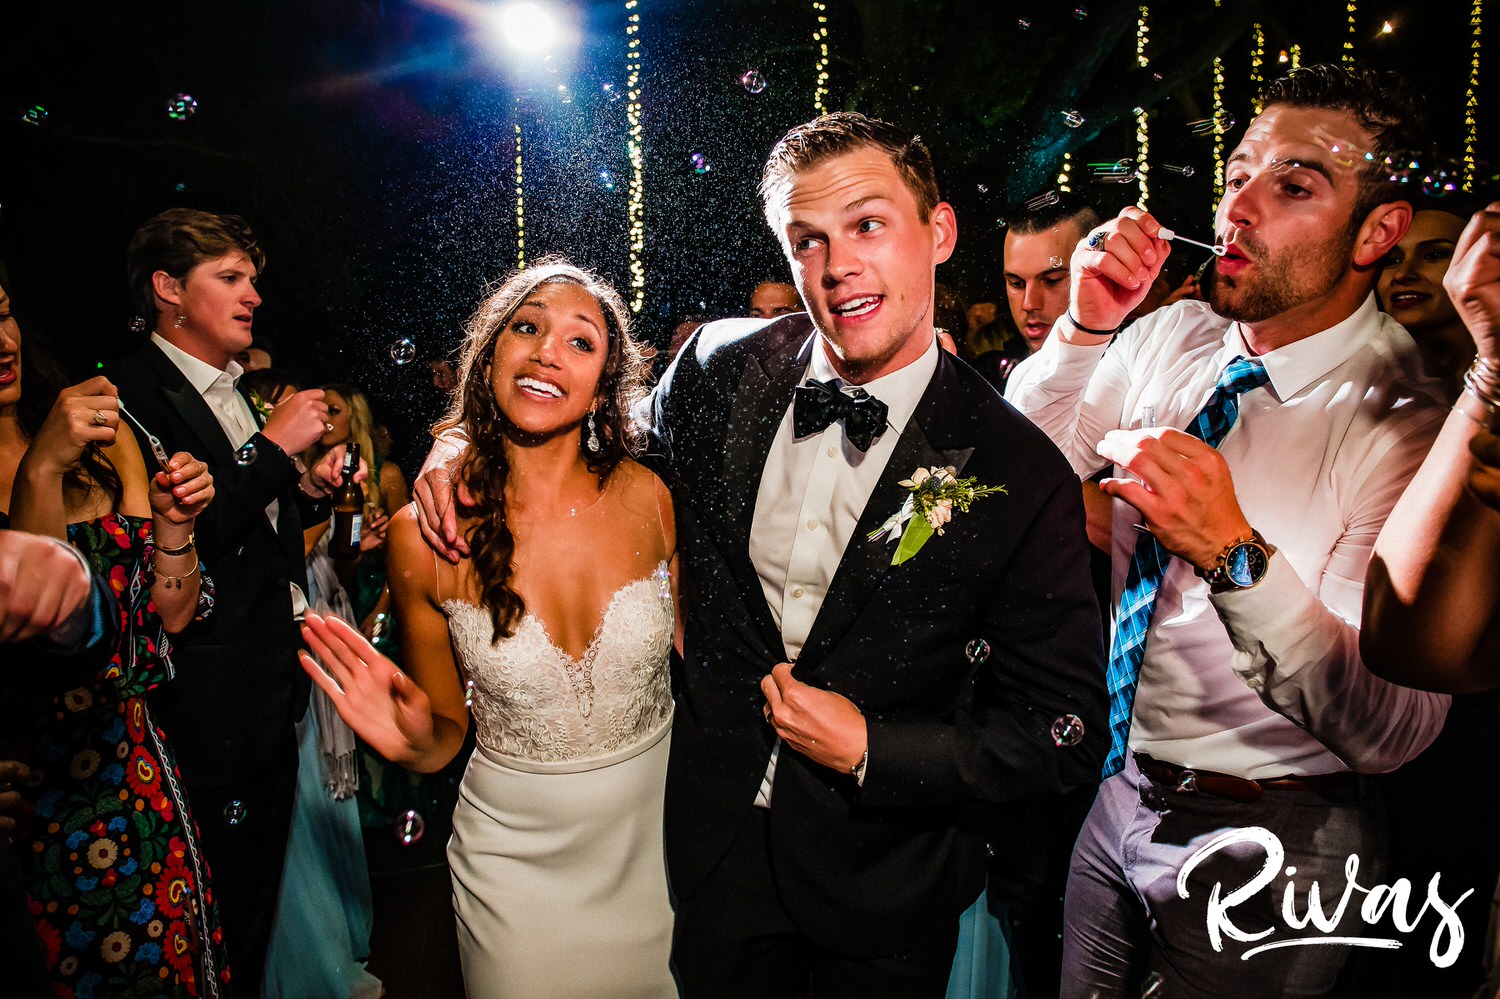 Saddlerock Ranch Summer Wedding | Destination Wedding Photographers | Rivas  | A photo of a bride and groom singing and exiting their wedding under a sea of bubbles and ropes of twinkly lights at Malibu's Saddlerock Ranch. 